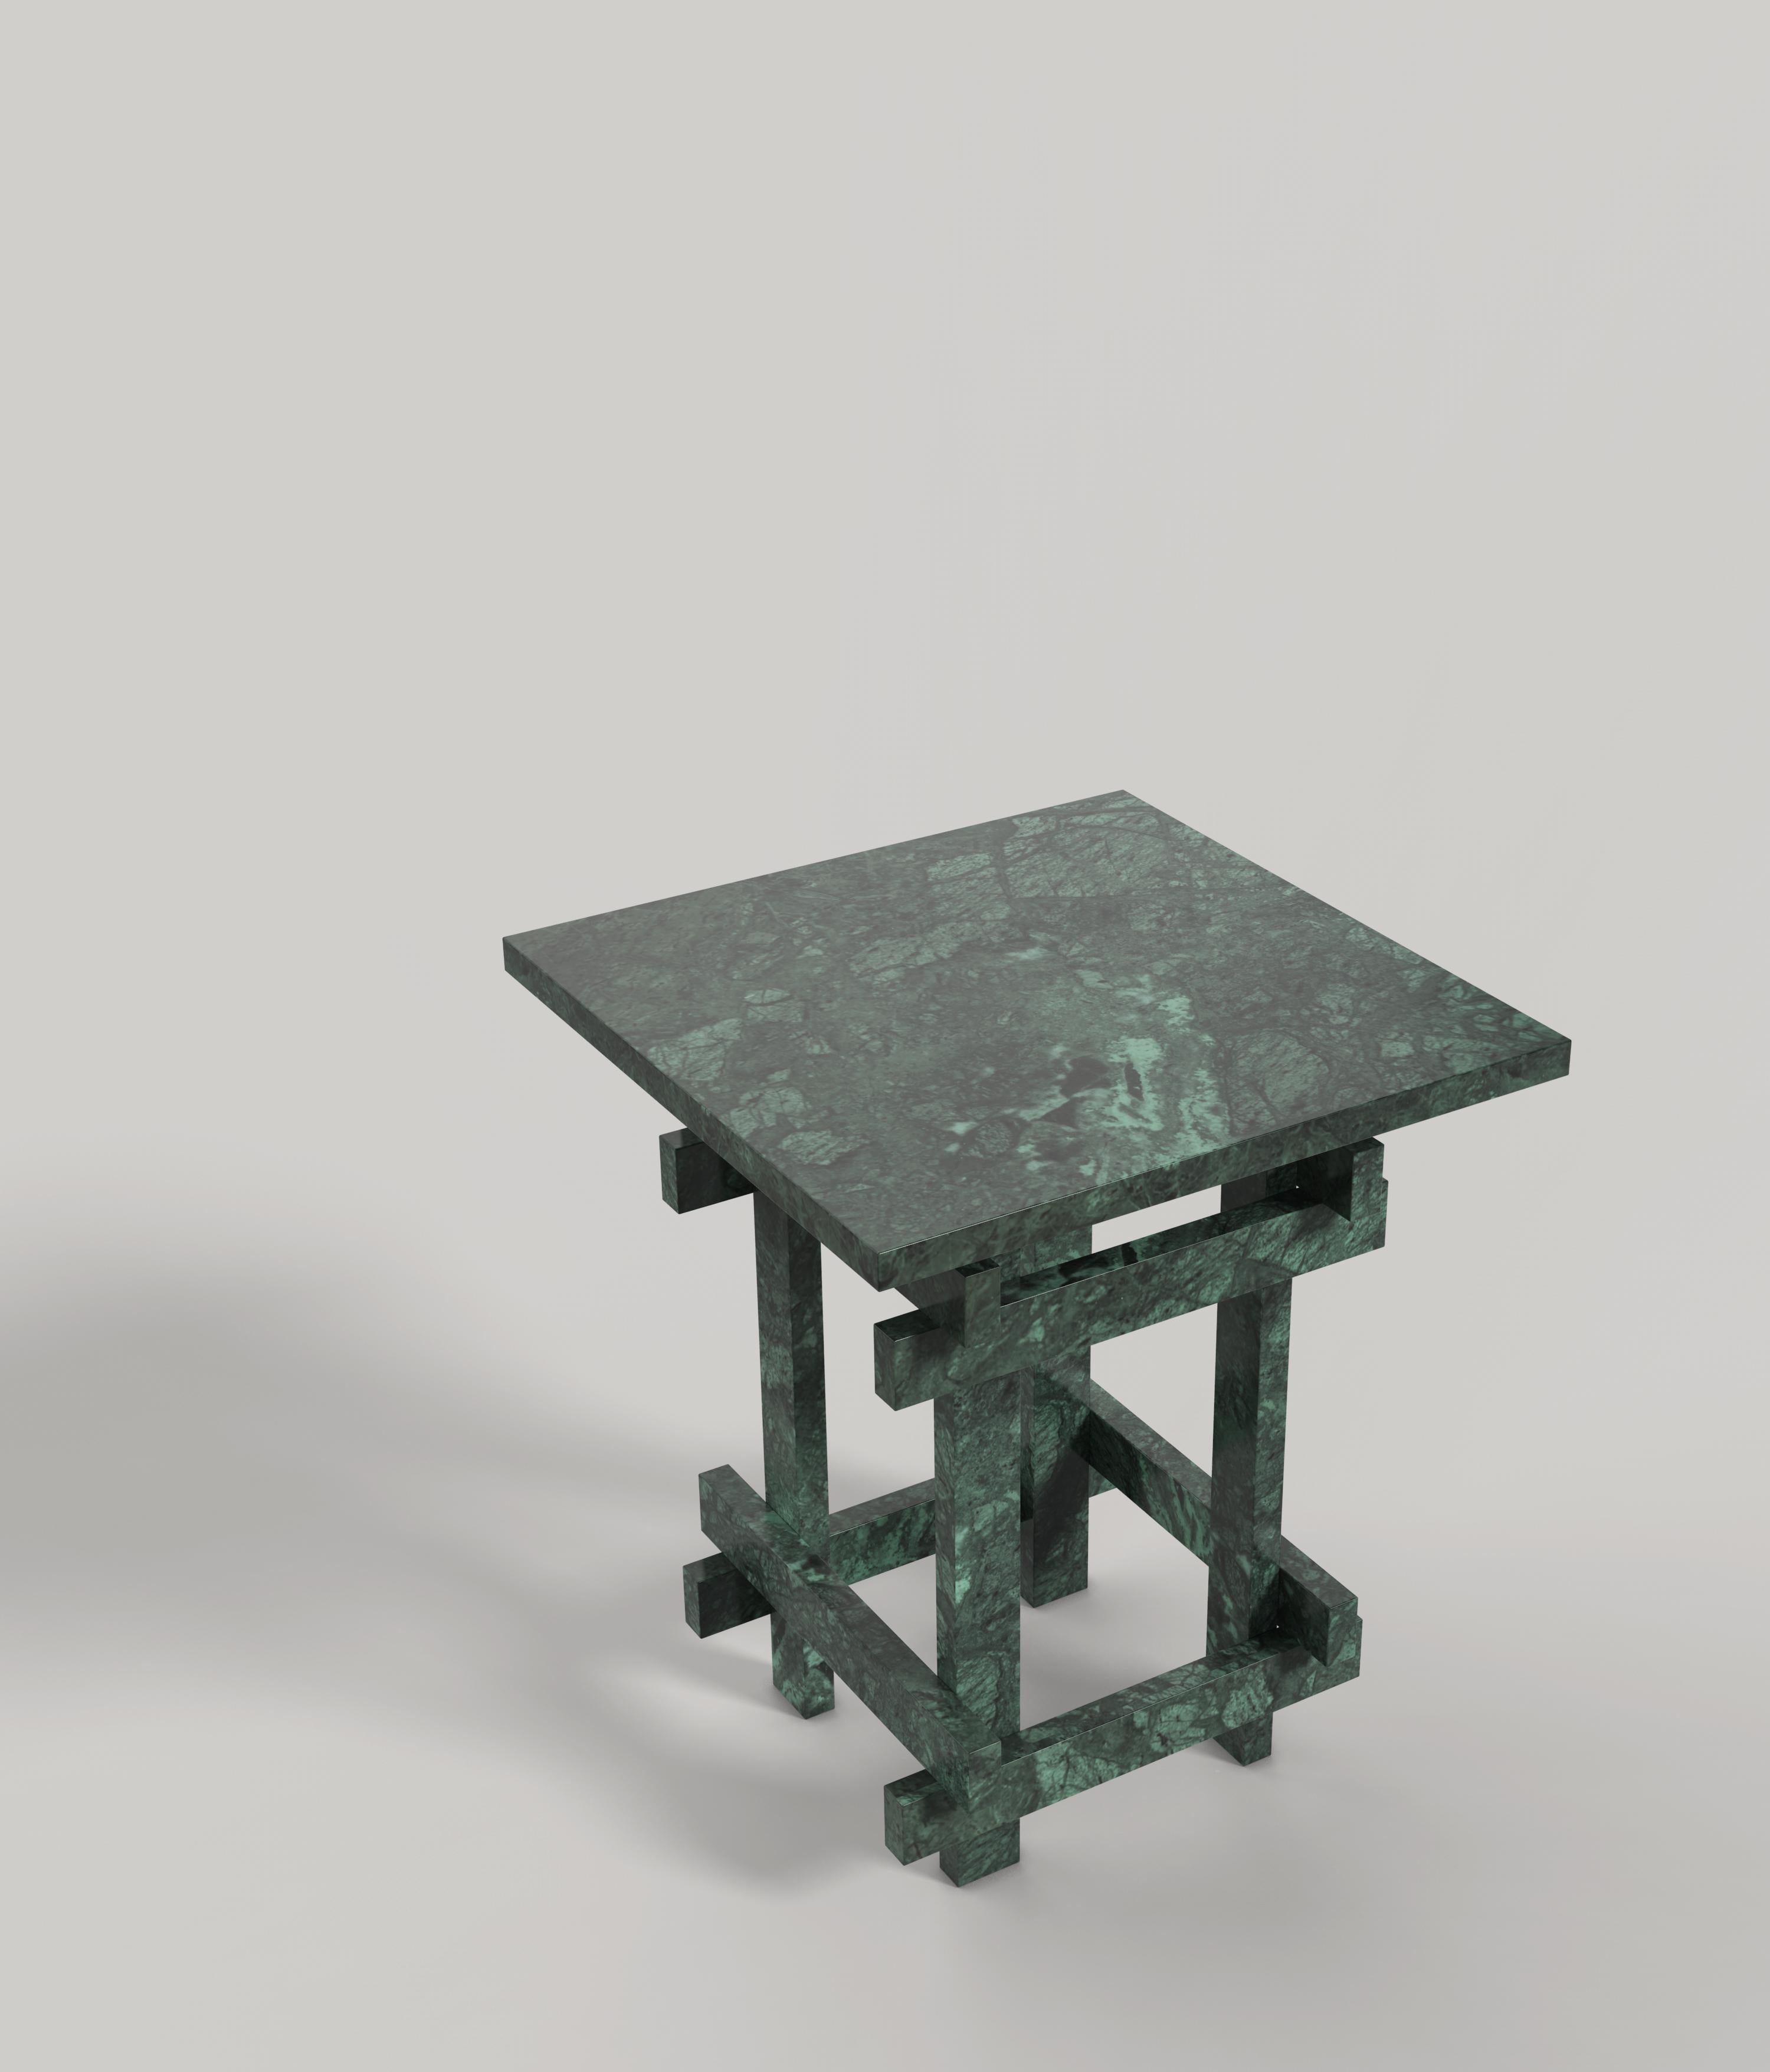 Paranoid V1 is a 21st Century sculptural side table made by Italian artisans in green Guatemala marble. The piece is manufactured in a limited edition of 150 signed and progressively numbered examples. It is part of the collectible design language